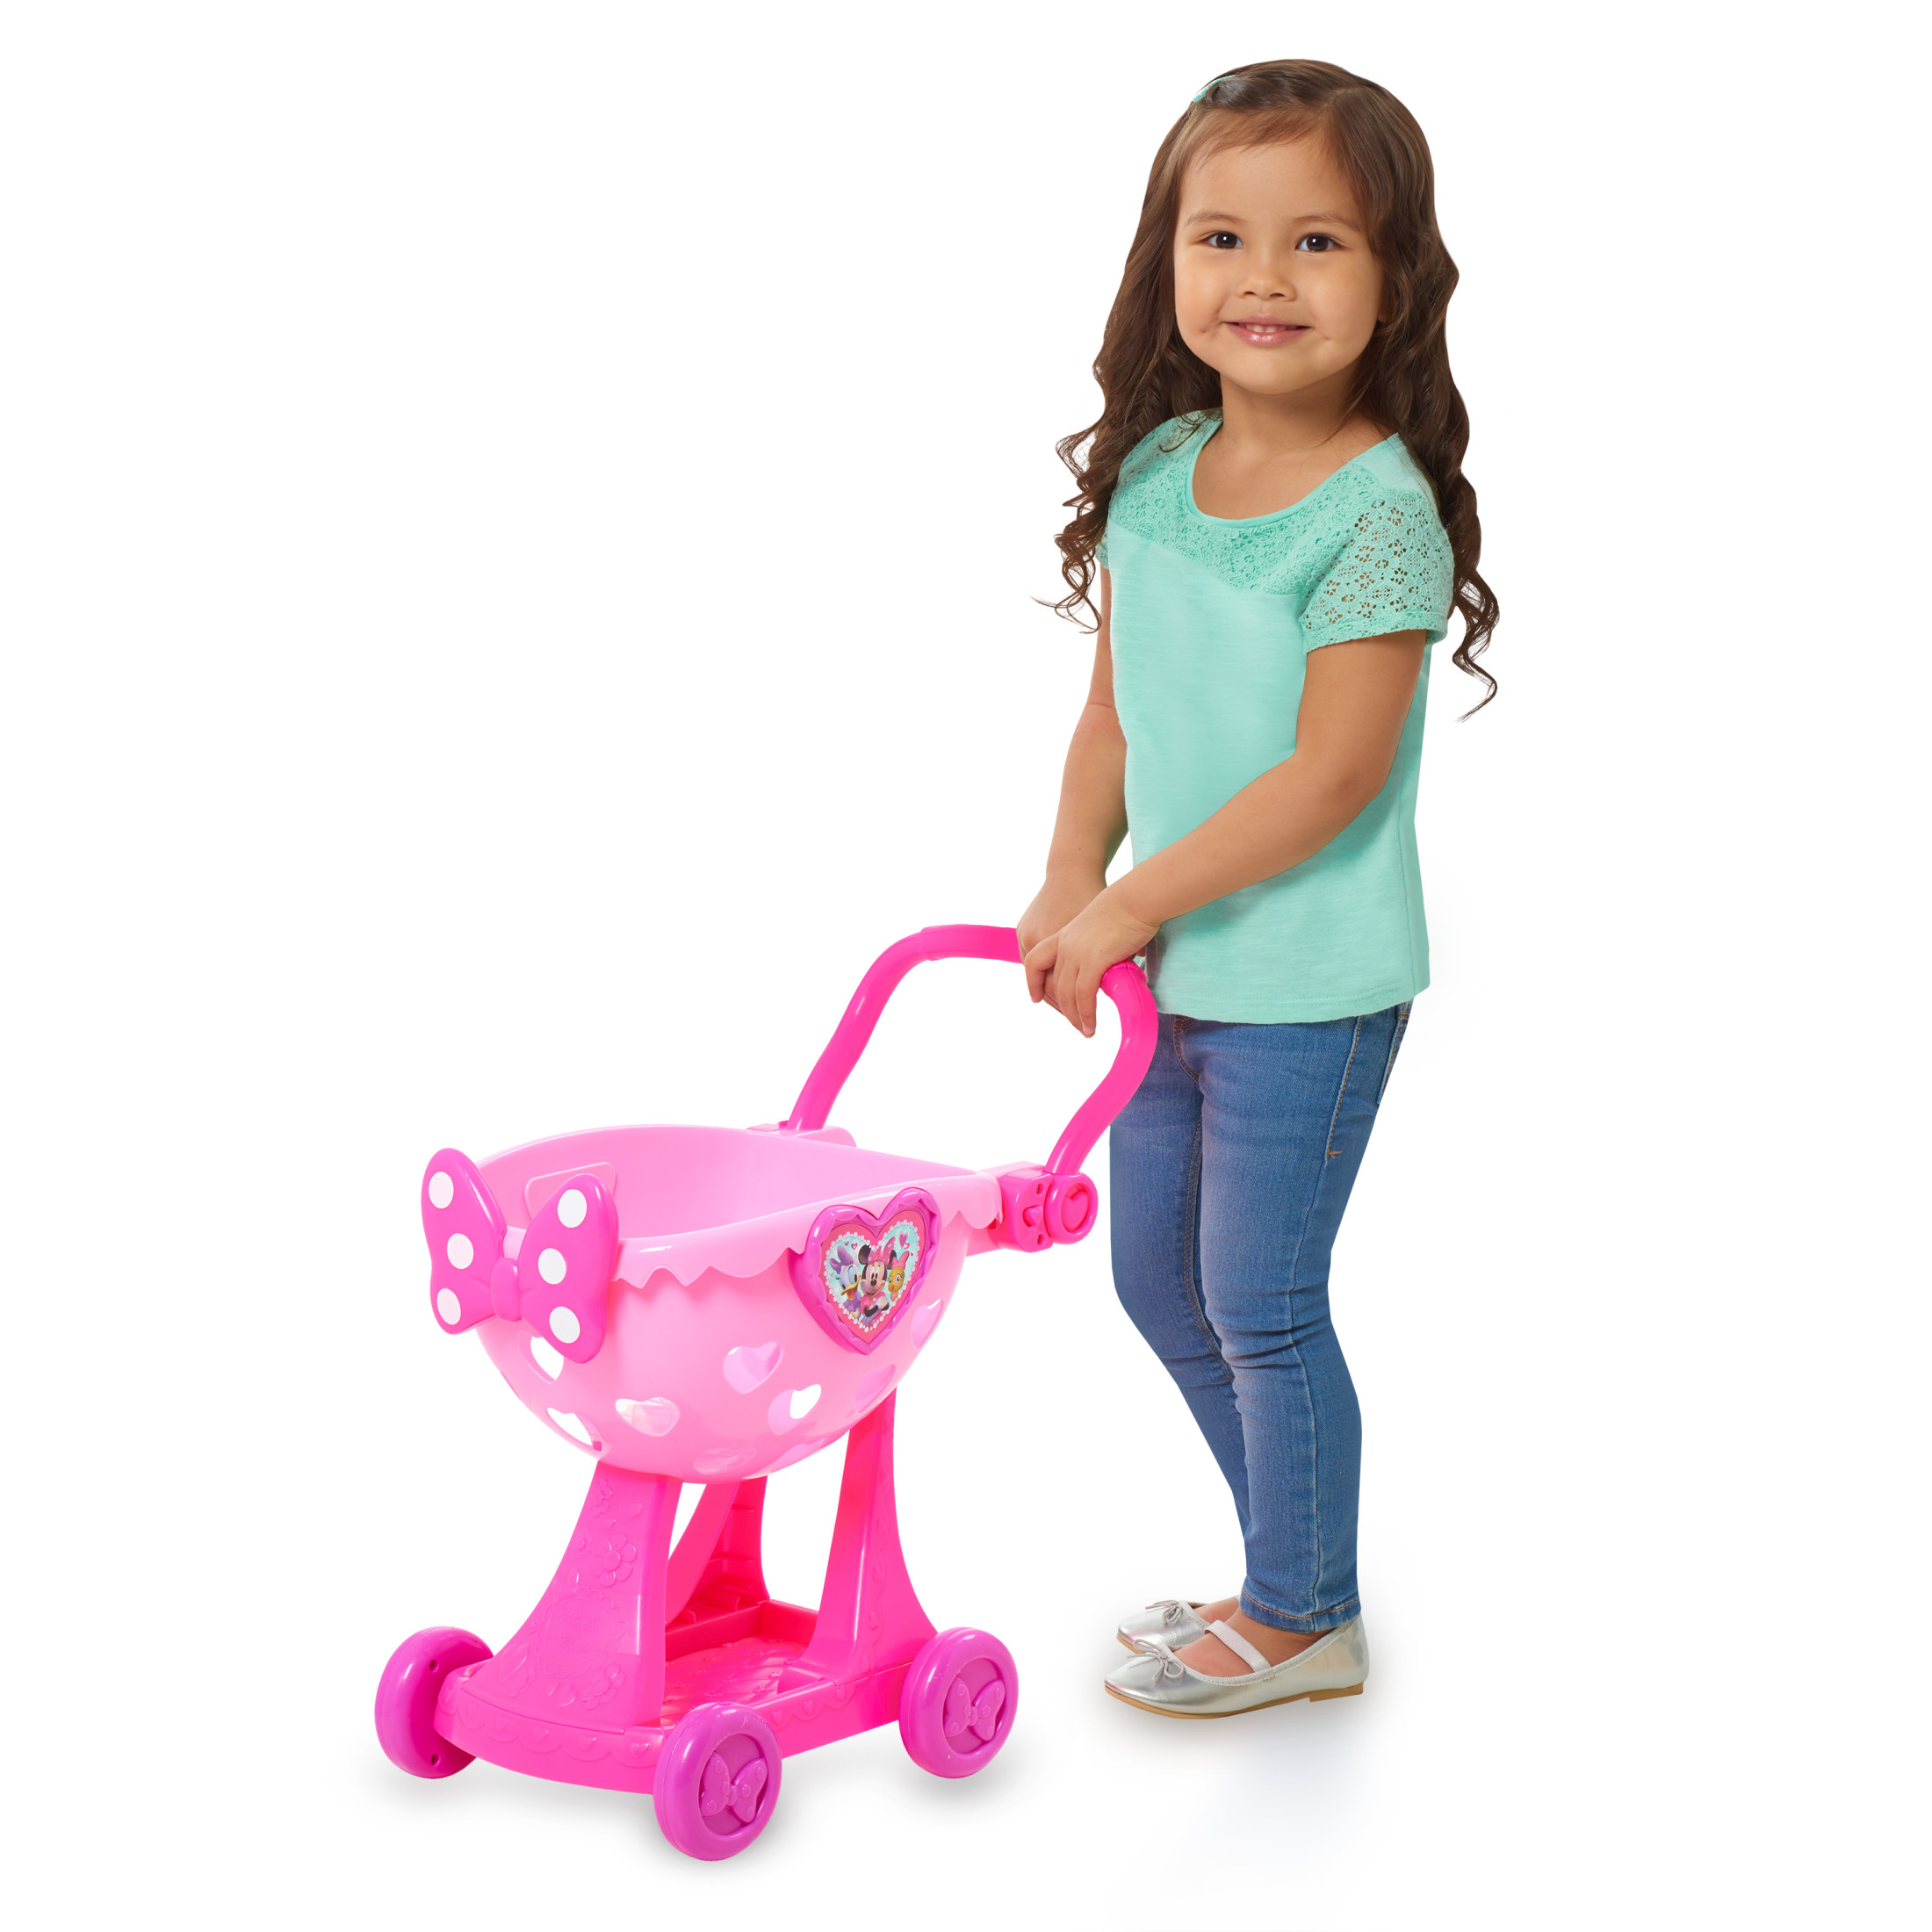 Disney Junior Minnie Mouse Bowtique Shopping Cart, Dress Up and Pretend Play, Kids Toys for Ages 3 up - image 3 of 9